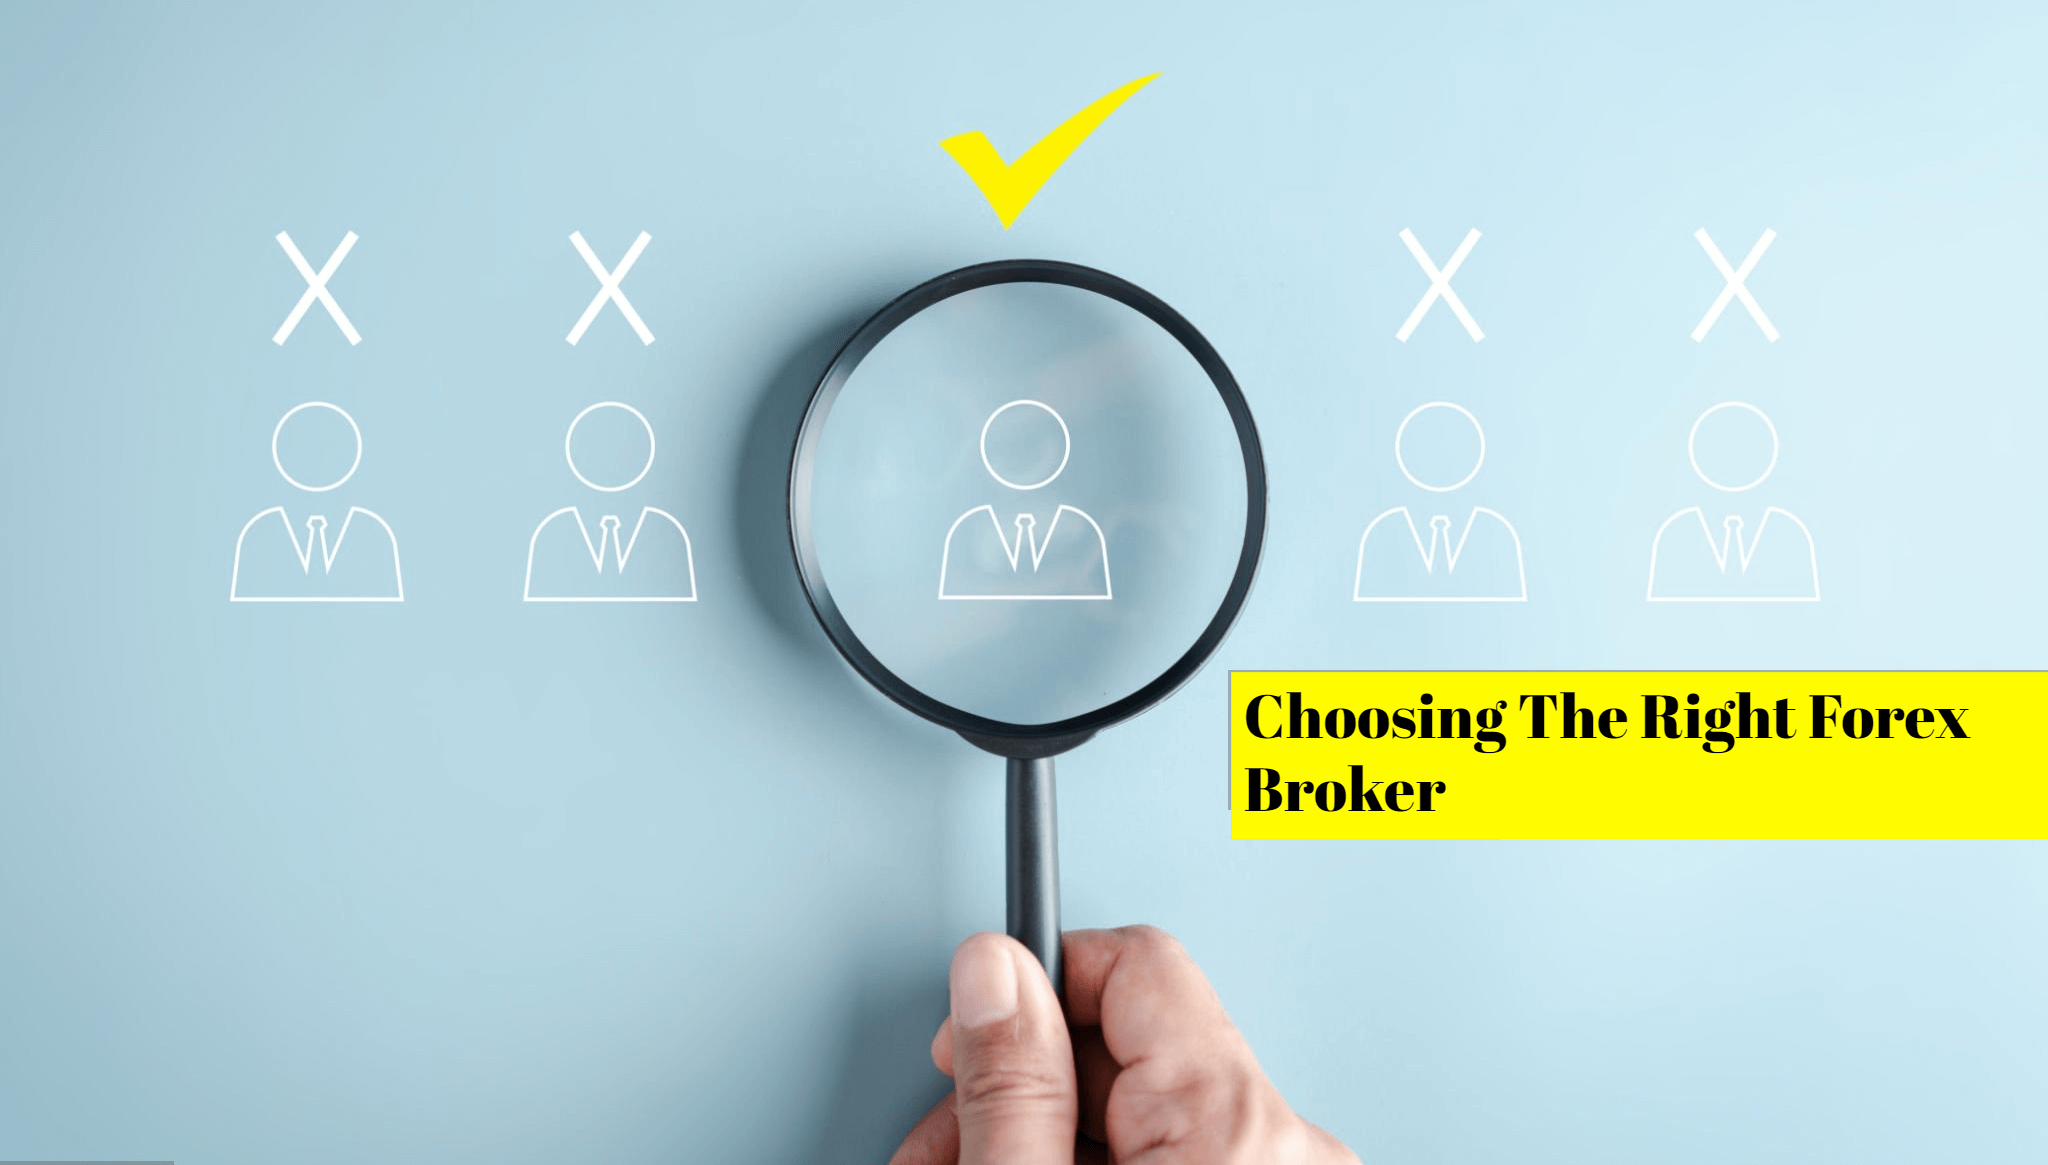 How to Choose Forex Broker - 5 Qualities to Consider